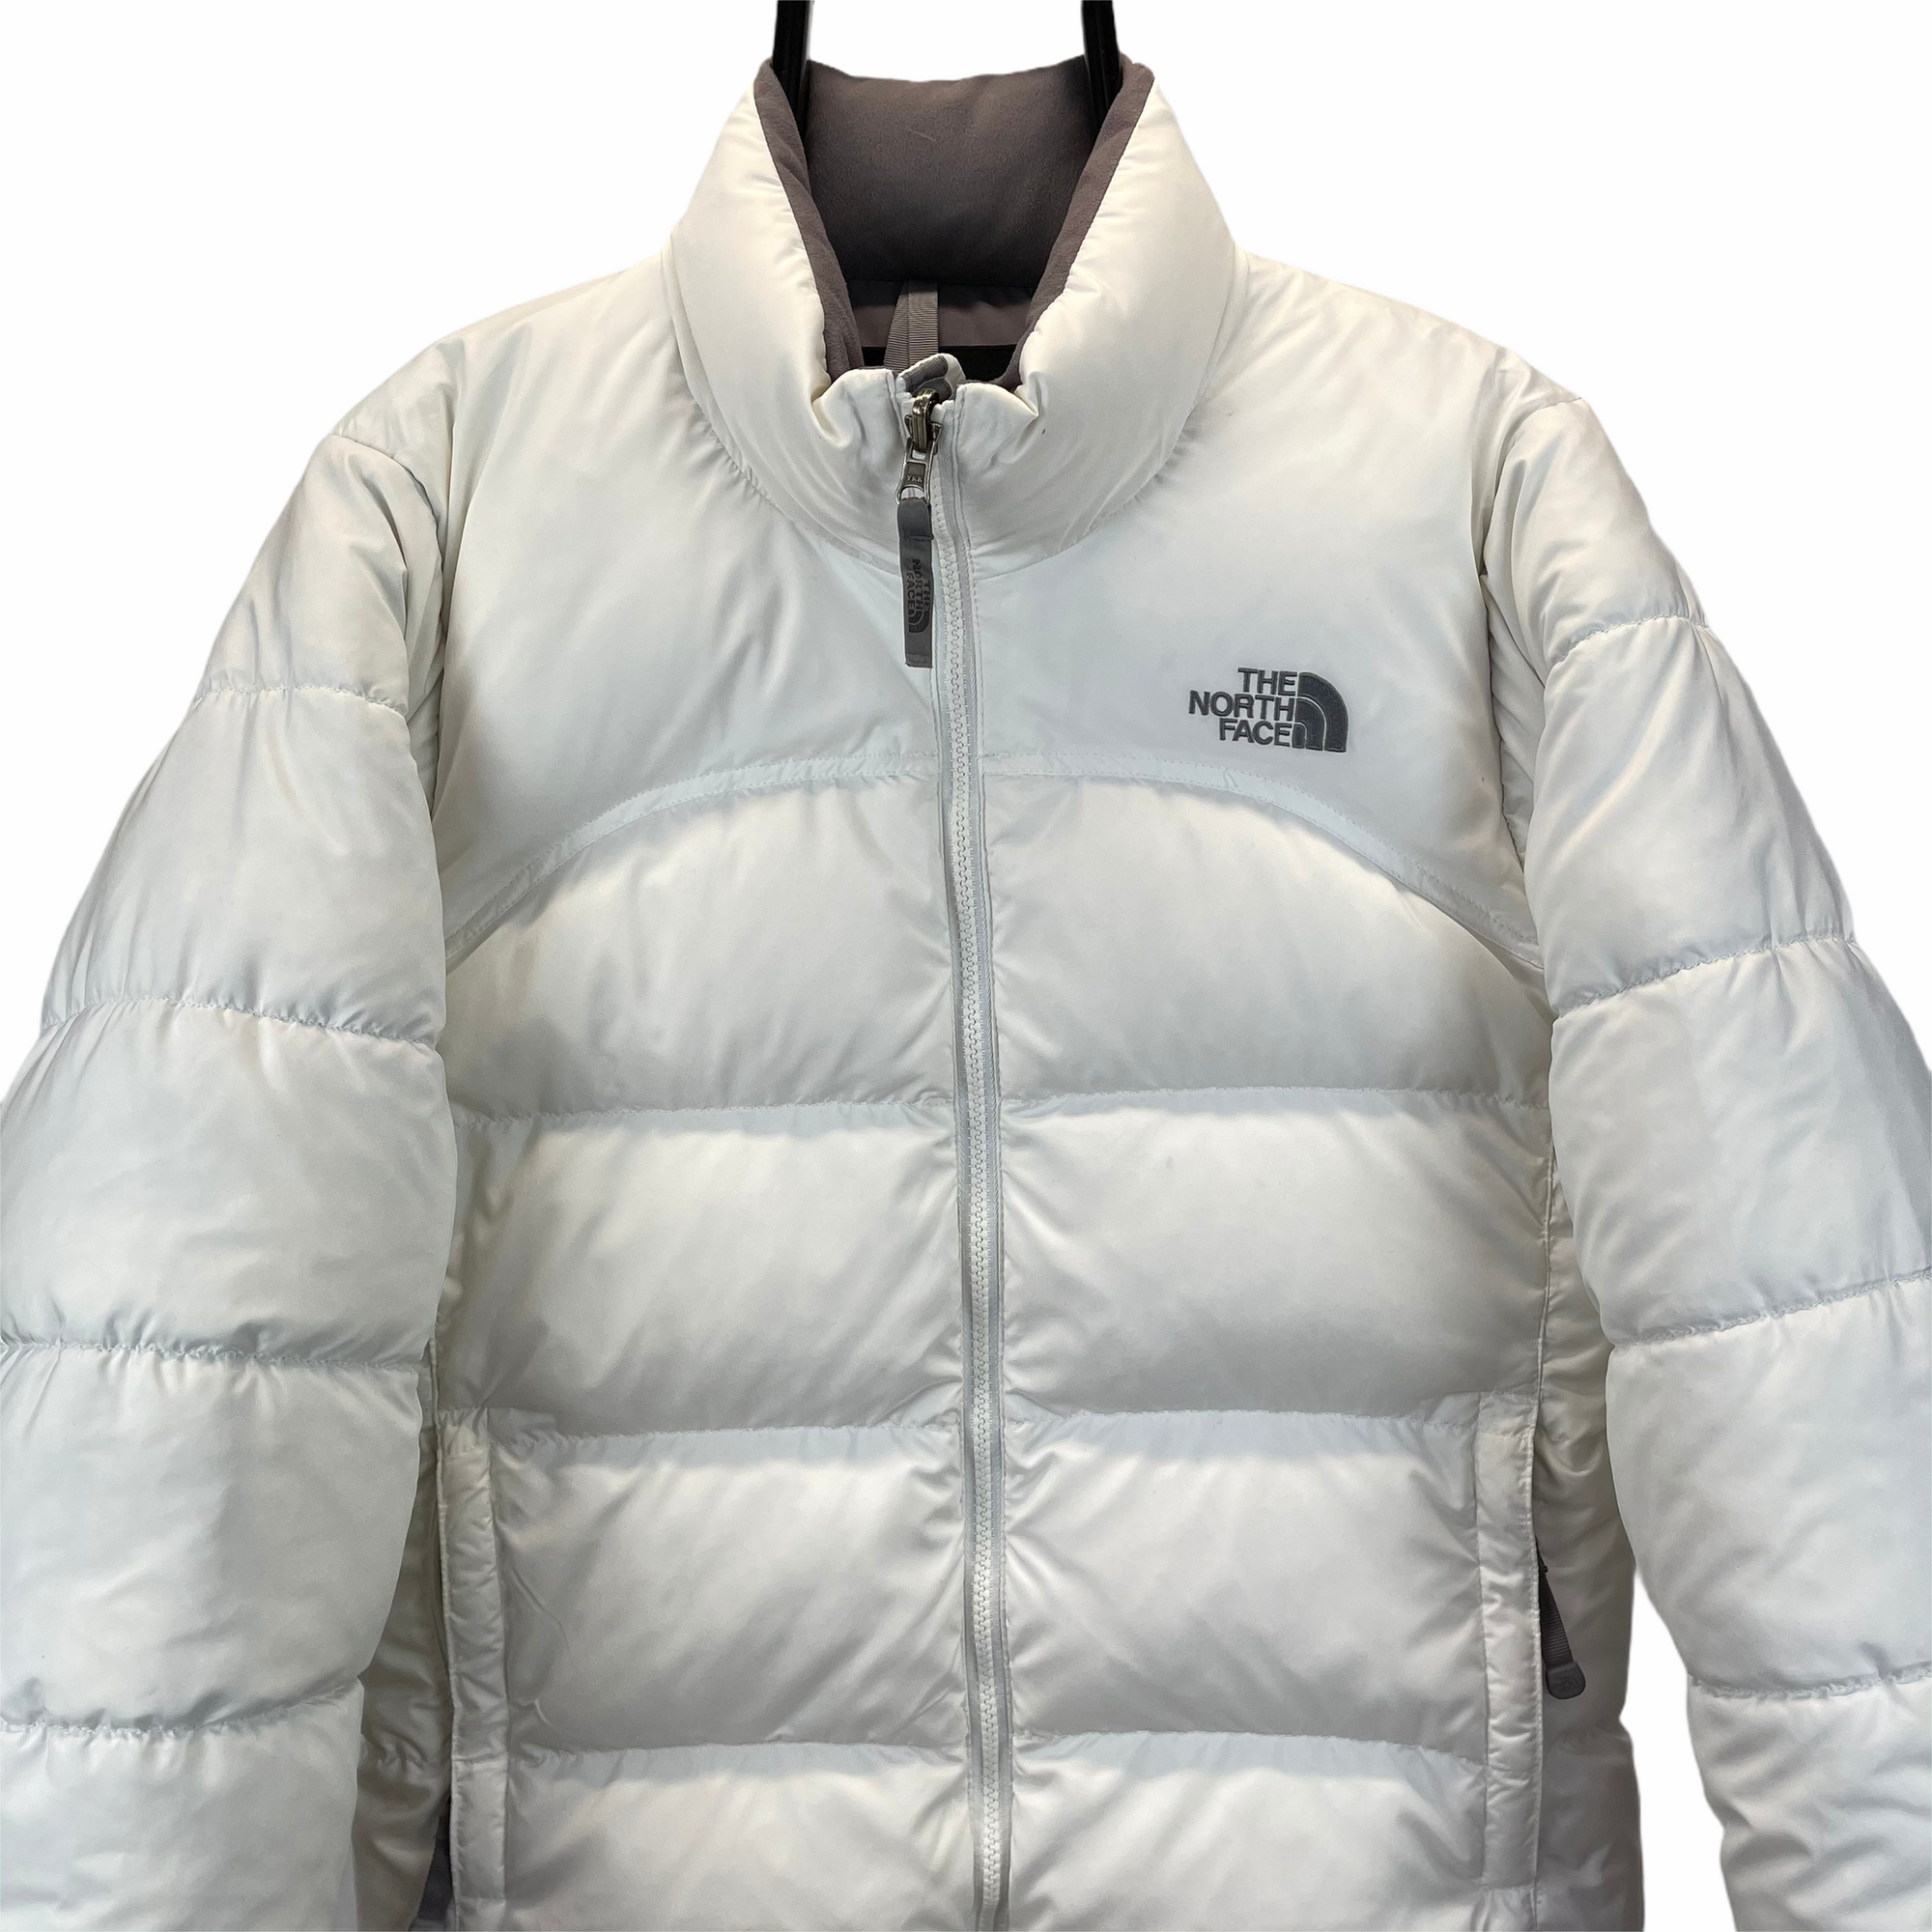 The North Face Nuptse 700 Down Puffer Jacket in White - Men's Small/Women's Medium